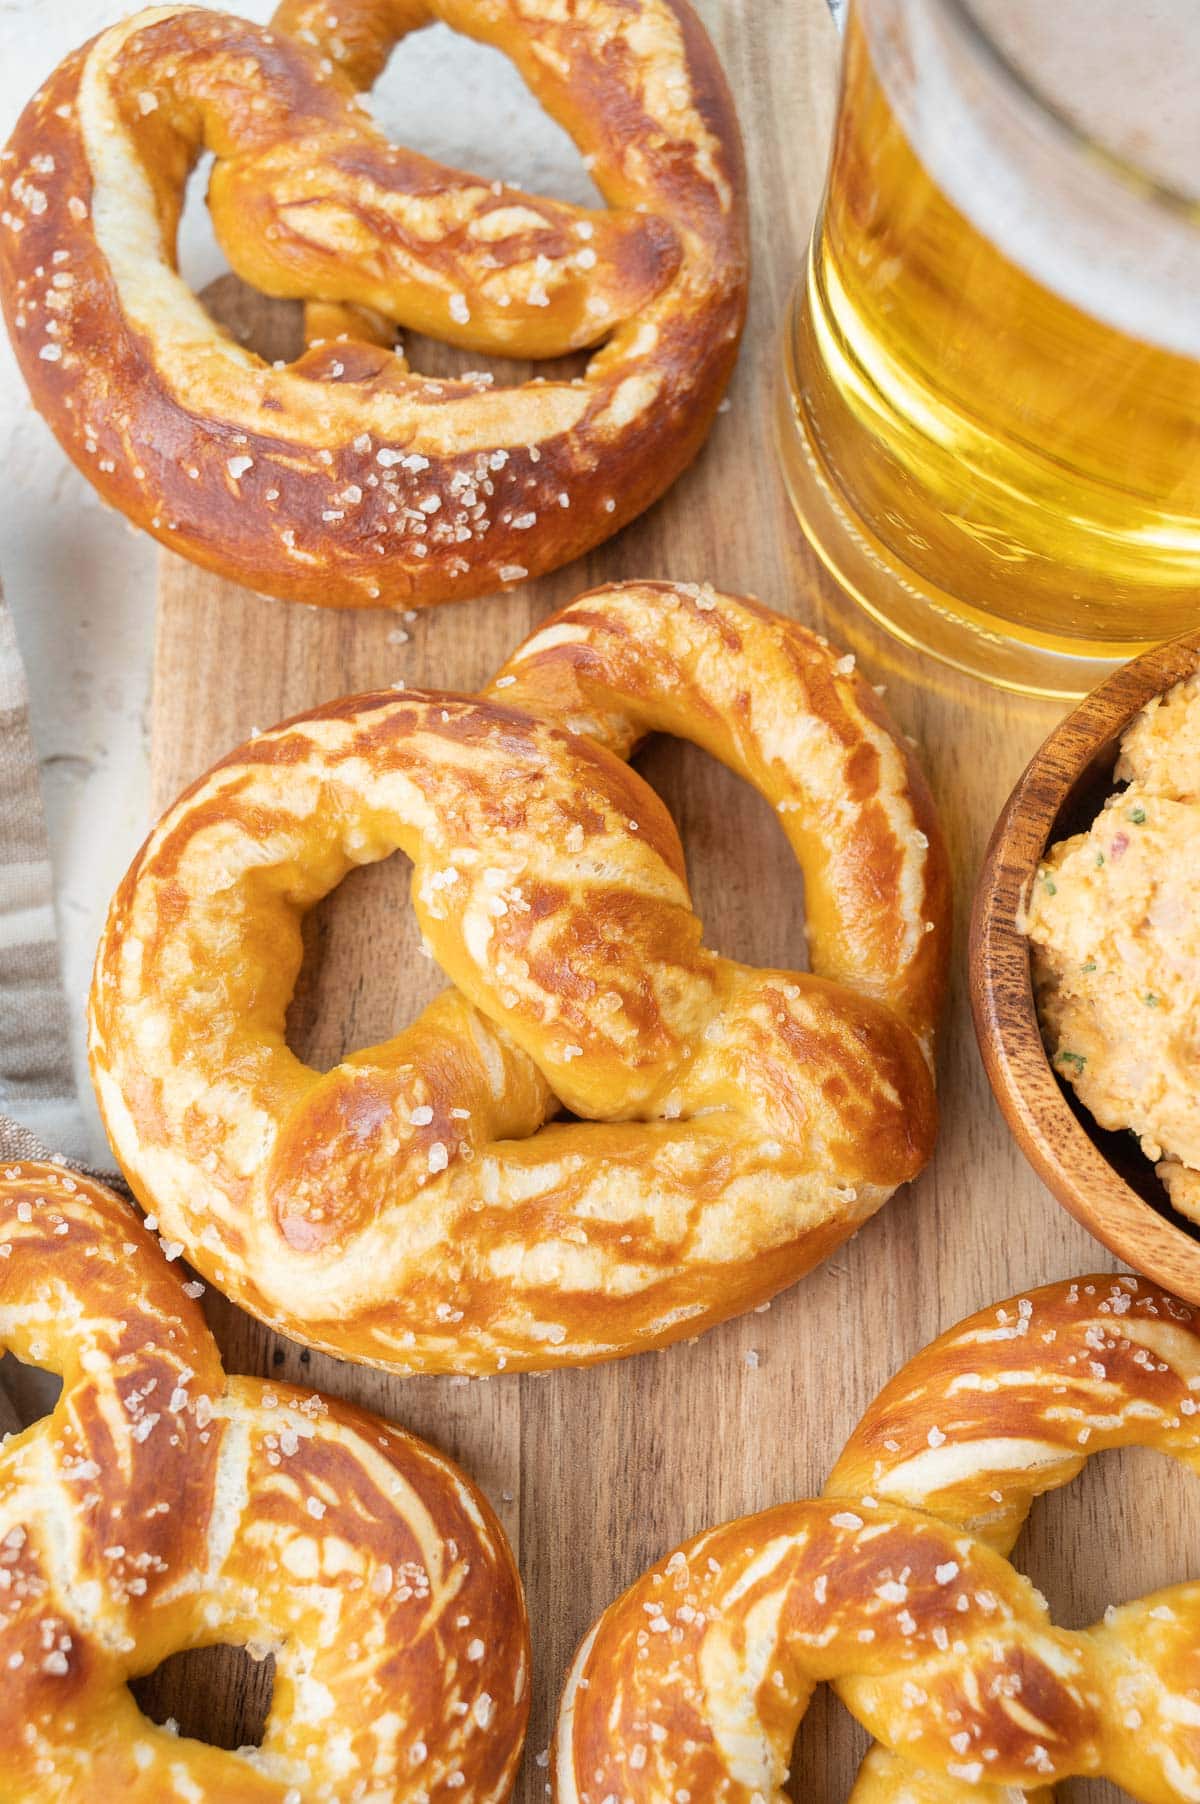 Soft pretzels on a wooden board. Beer and cheese dip on the side.